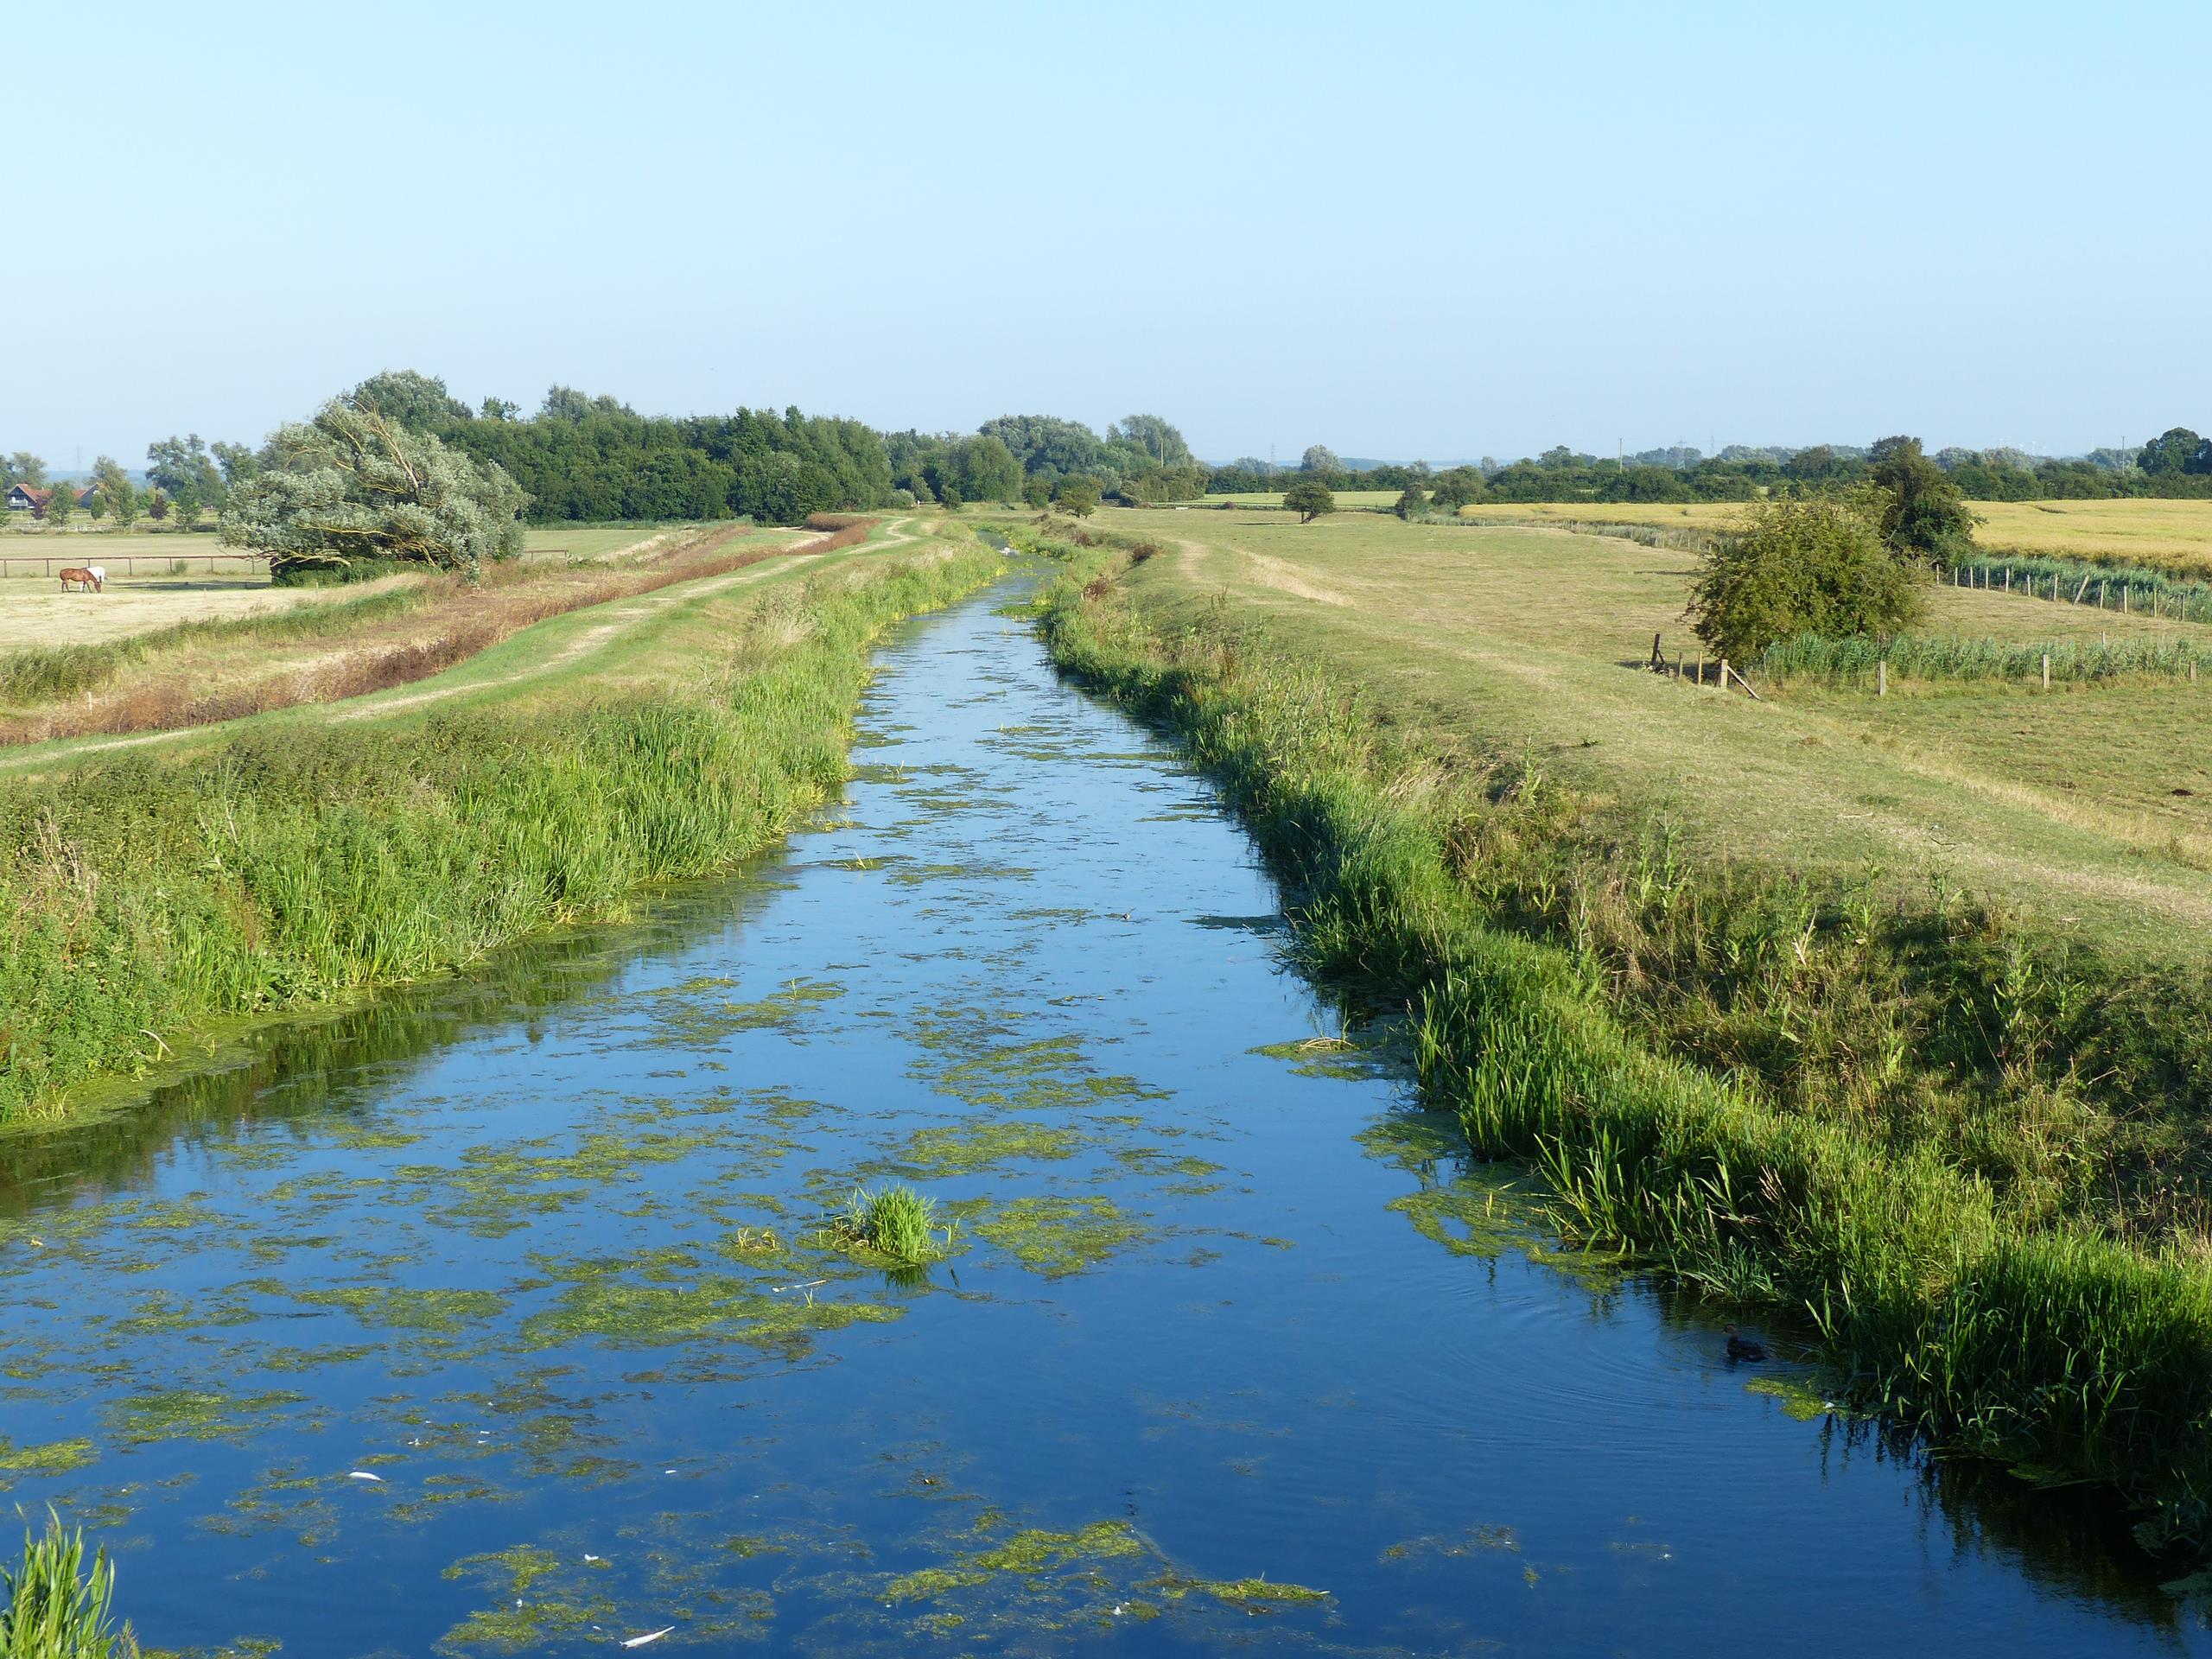 A view of the catchment in East Anglia from the water